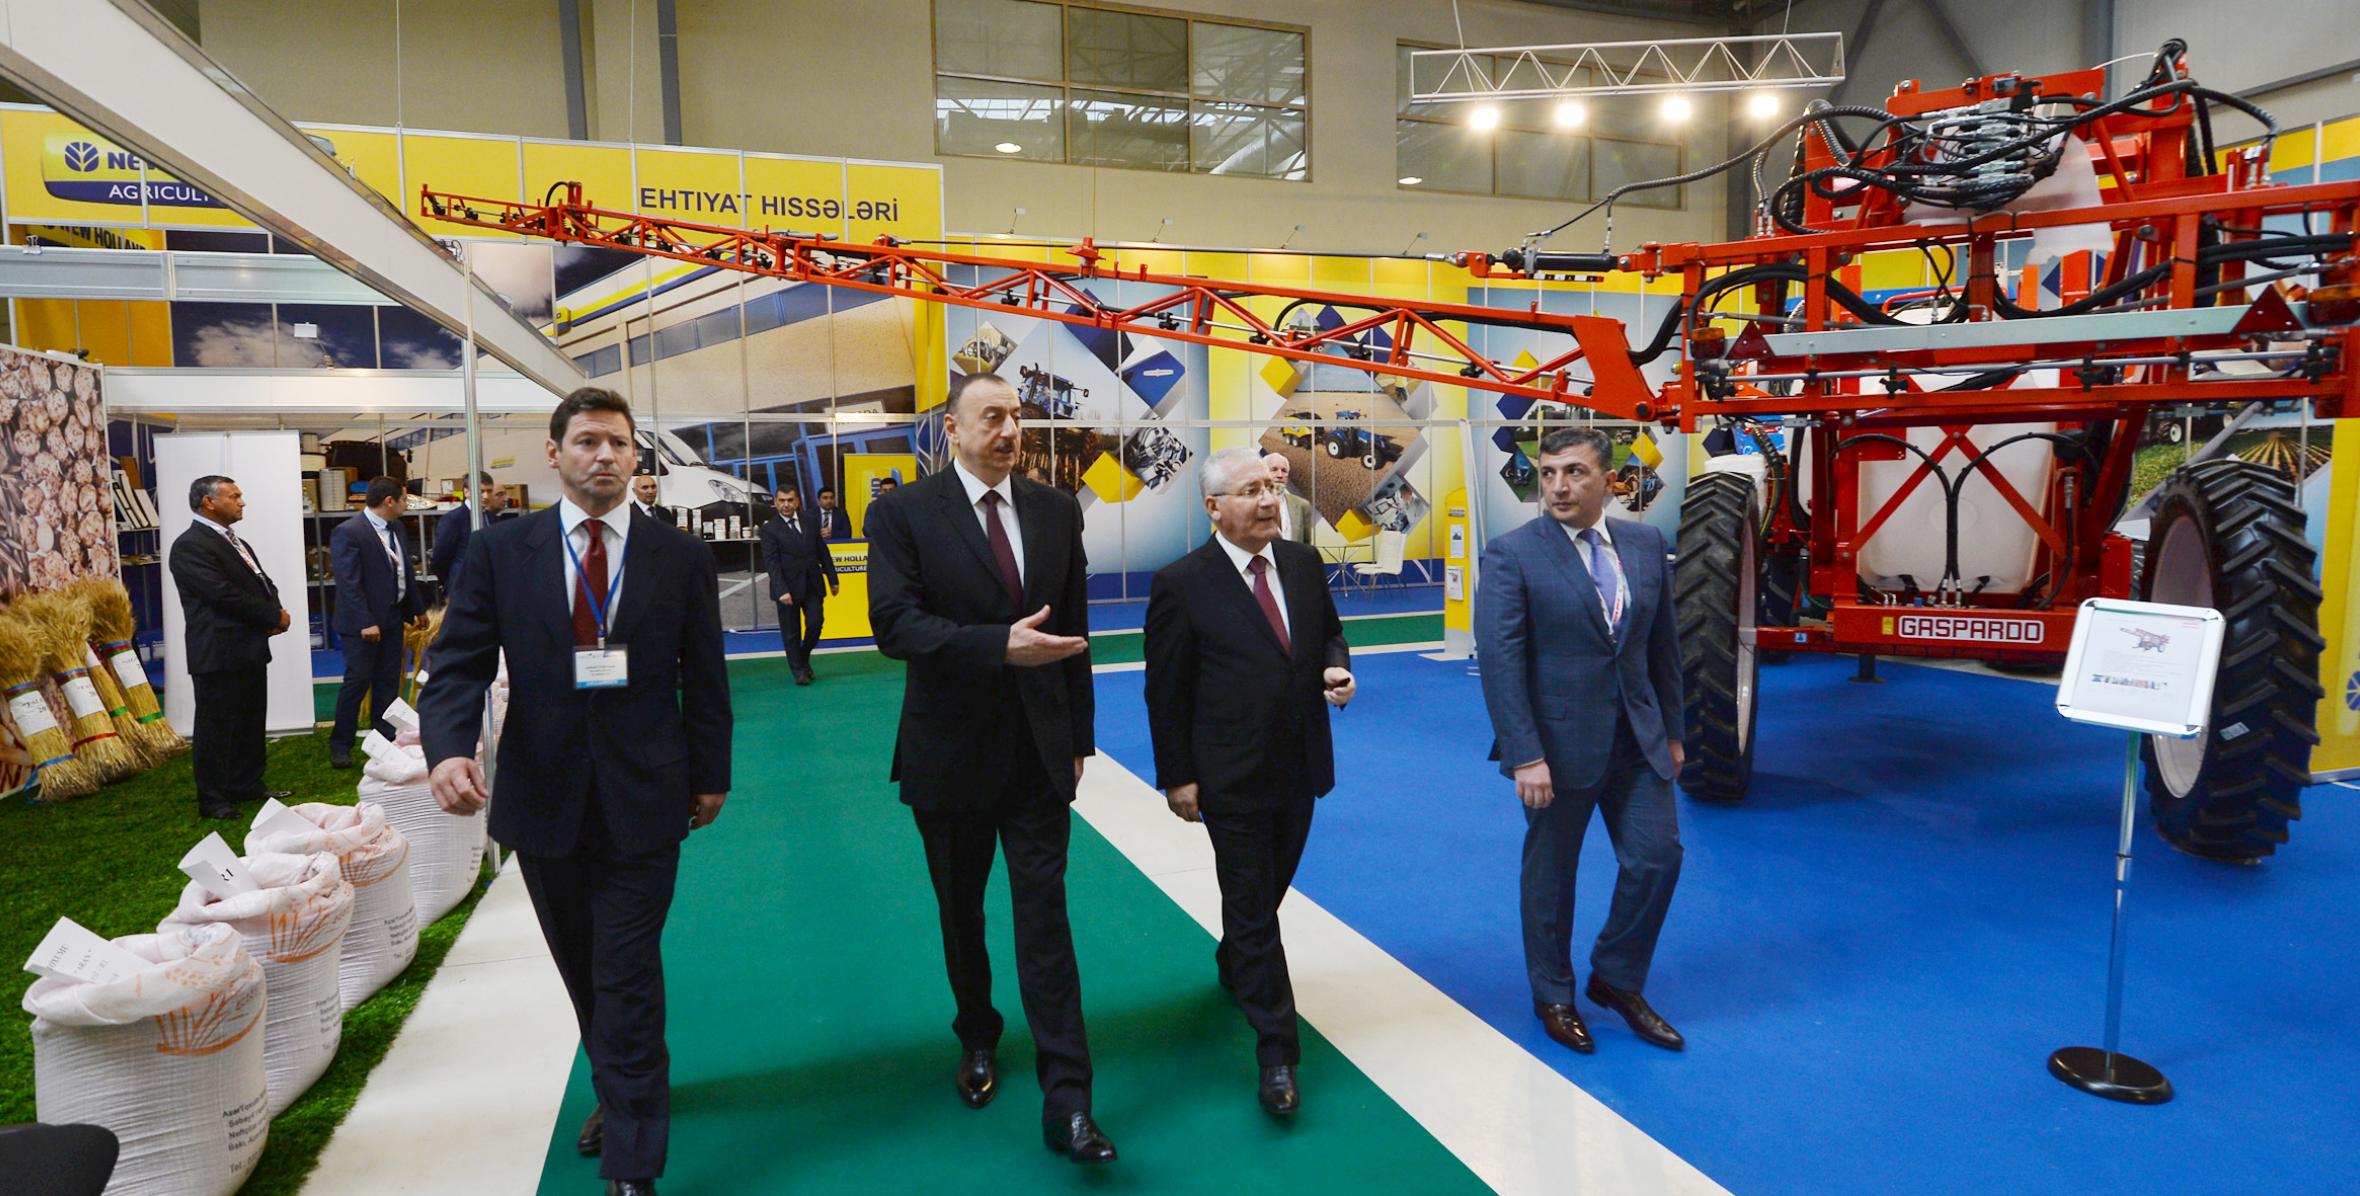 Ilham Aliyev reviewed the 21st Azerbaijan International Food Industry exhibition and 9th Azerbaijan International Agriculture Exhibition